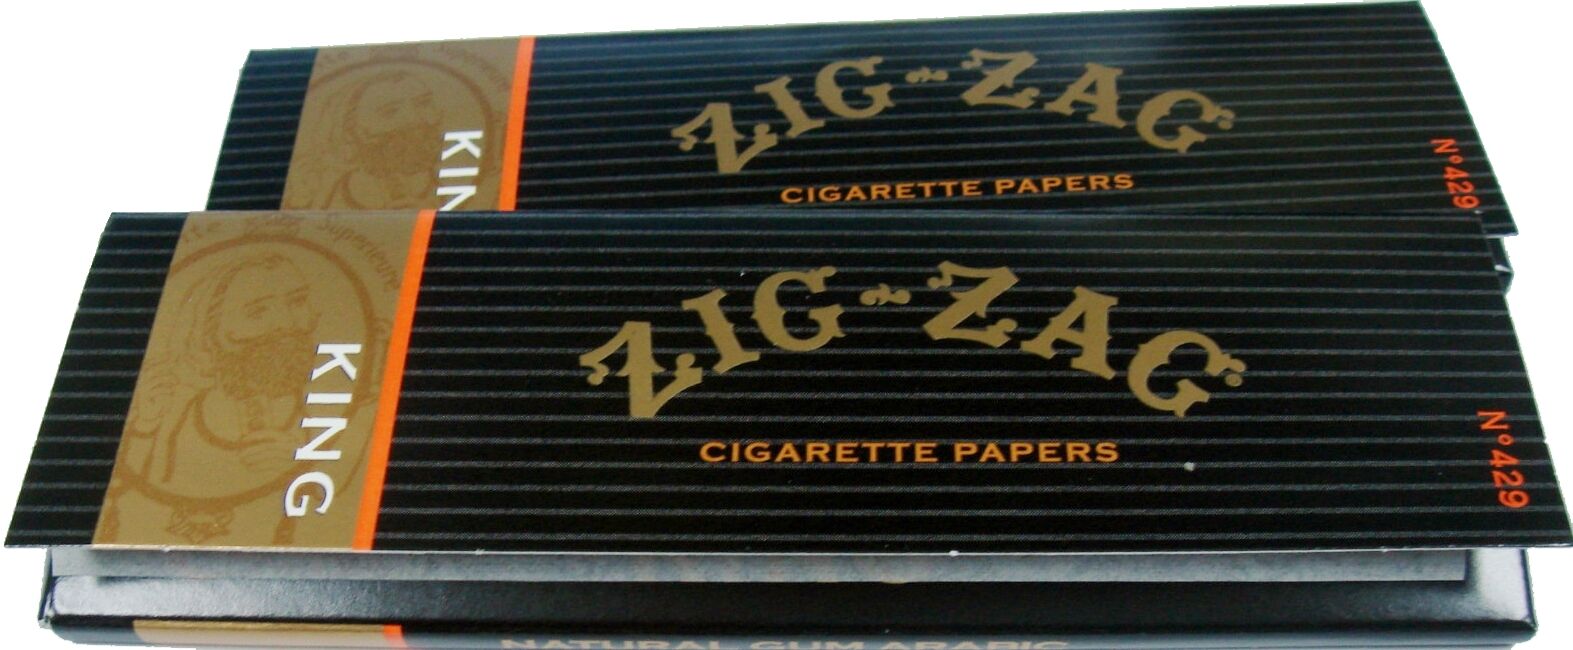 Zig Zag King Size Rolling Papers (2 Packs Of 32 Papers) **Free Shipping**